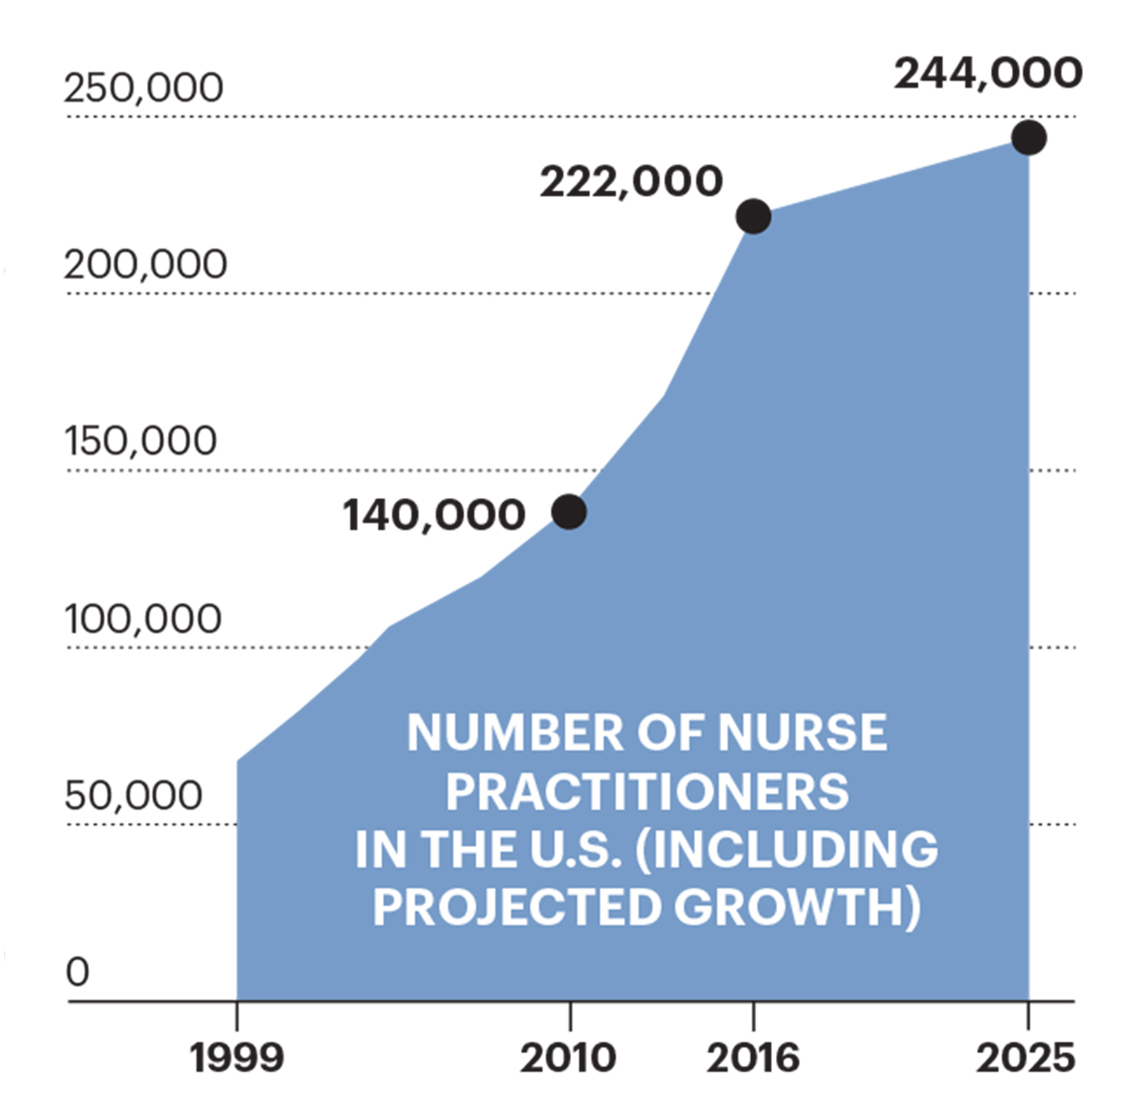 Numbers of Nurse Practitioners in the U.S